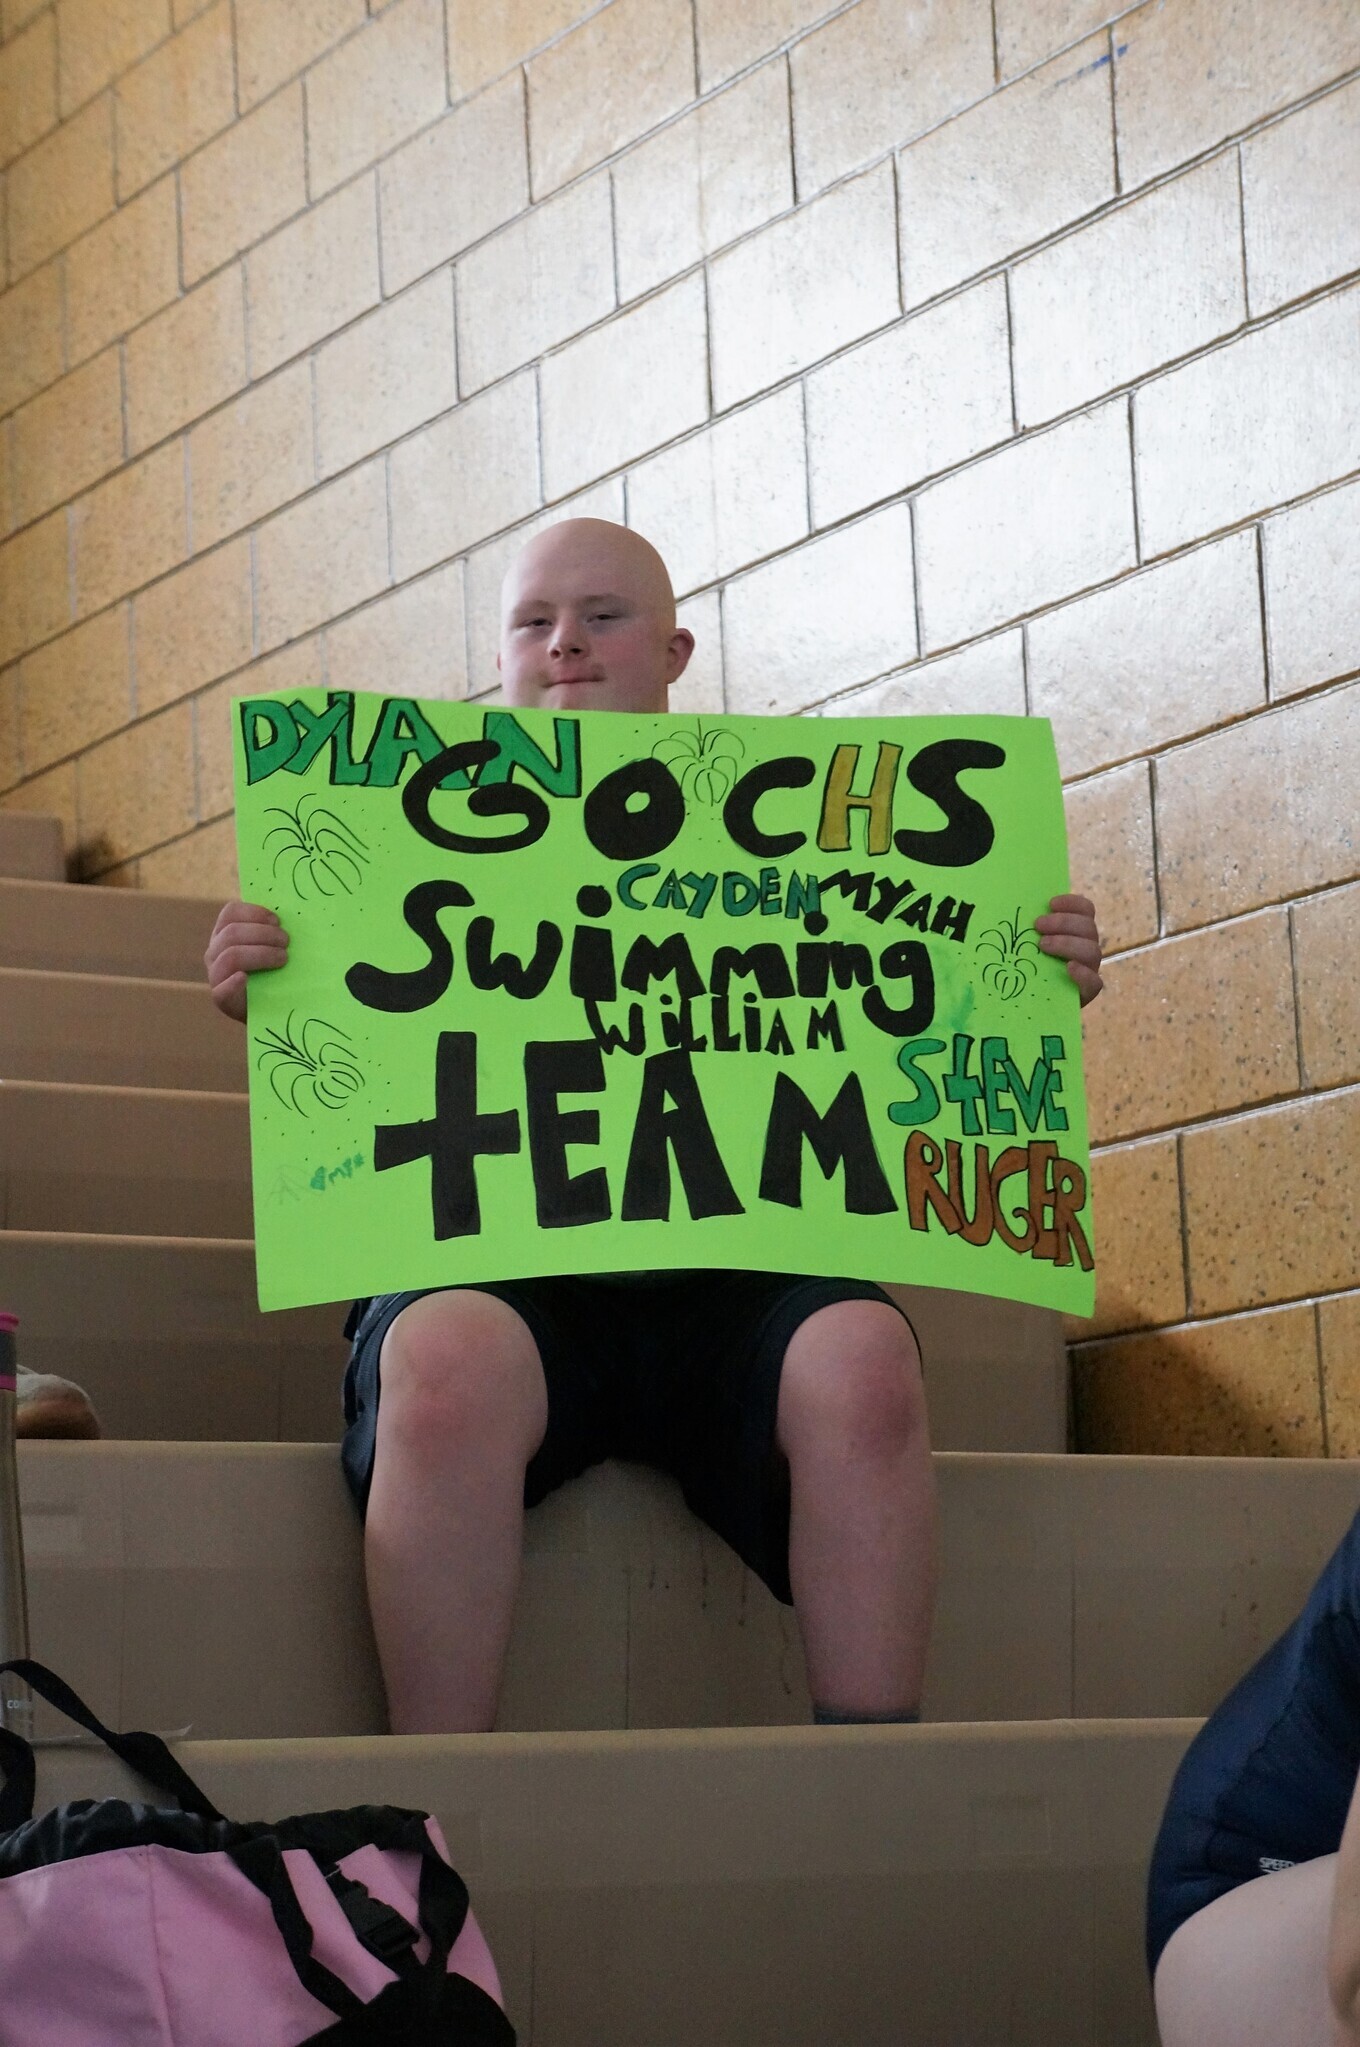 Fans cheer for Special Olympics swimmers